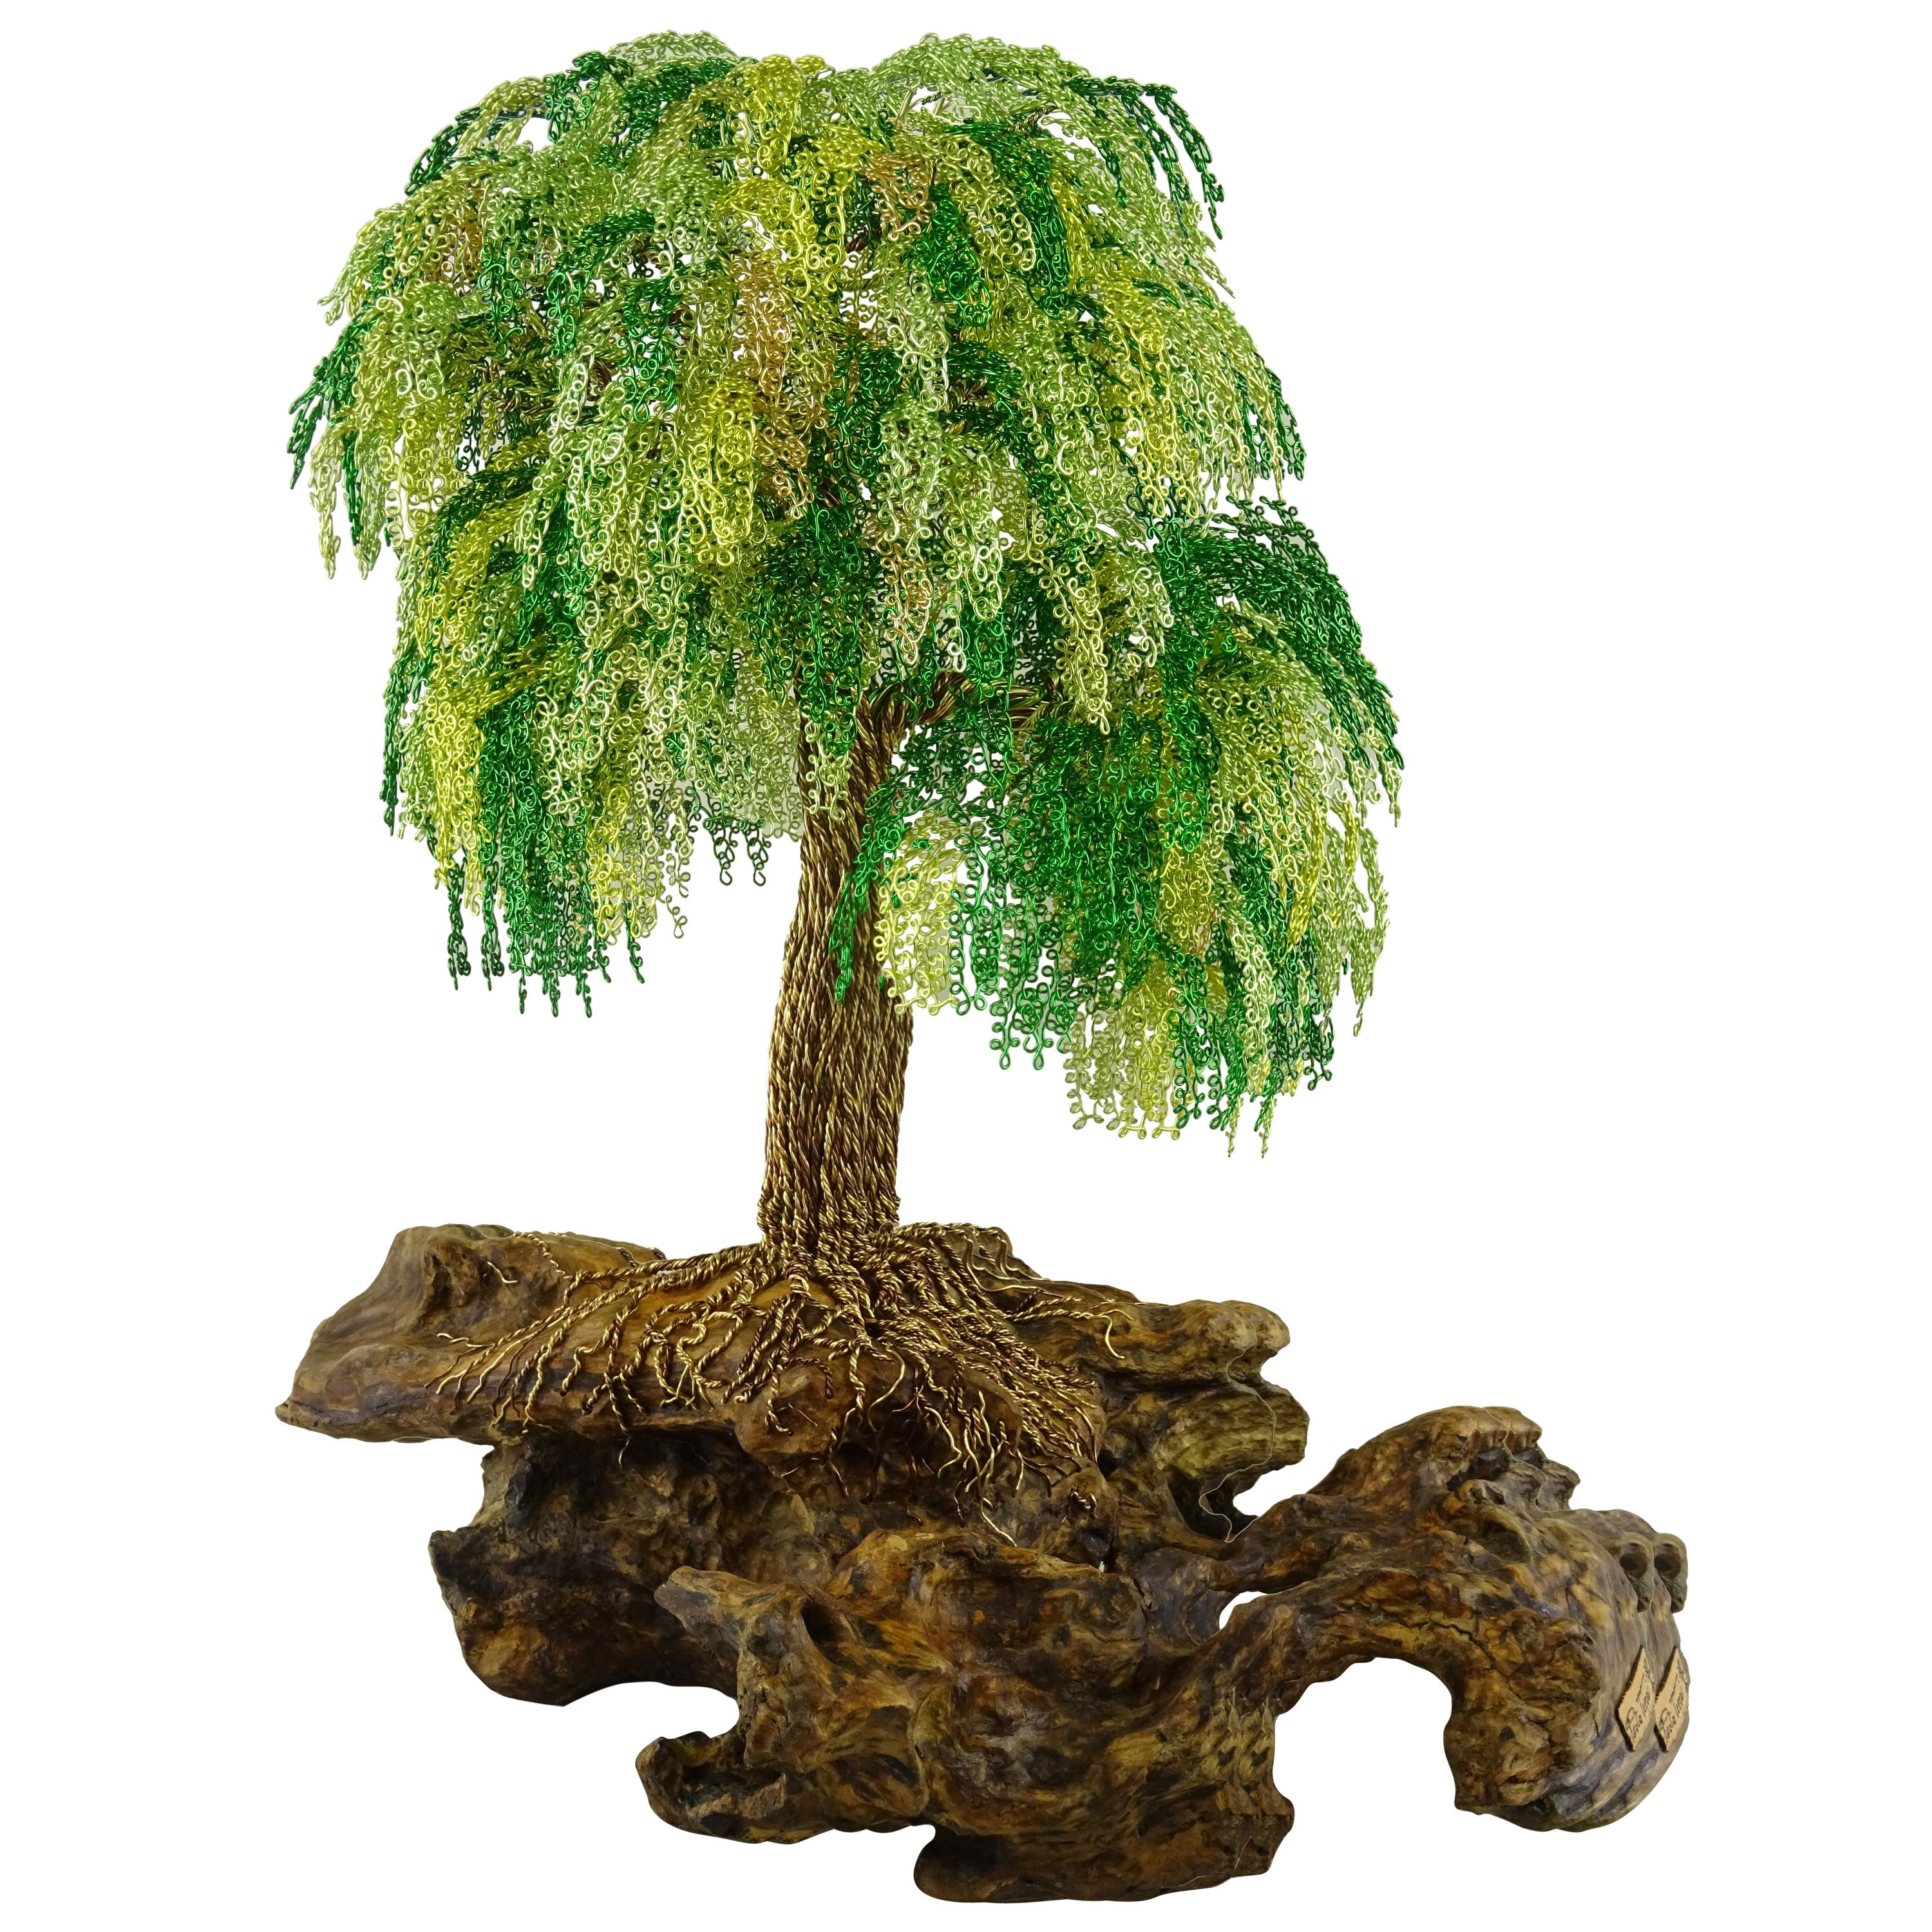 The Cascata Bonsai is inspired by the Niagara falls.
The materials are wood and metals, representing both the strength of life and the roots of Mother Nature.
Sculptures are composed by wires that intertwine each other. 
The Bonsai is composed by